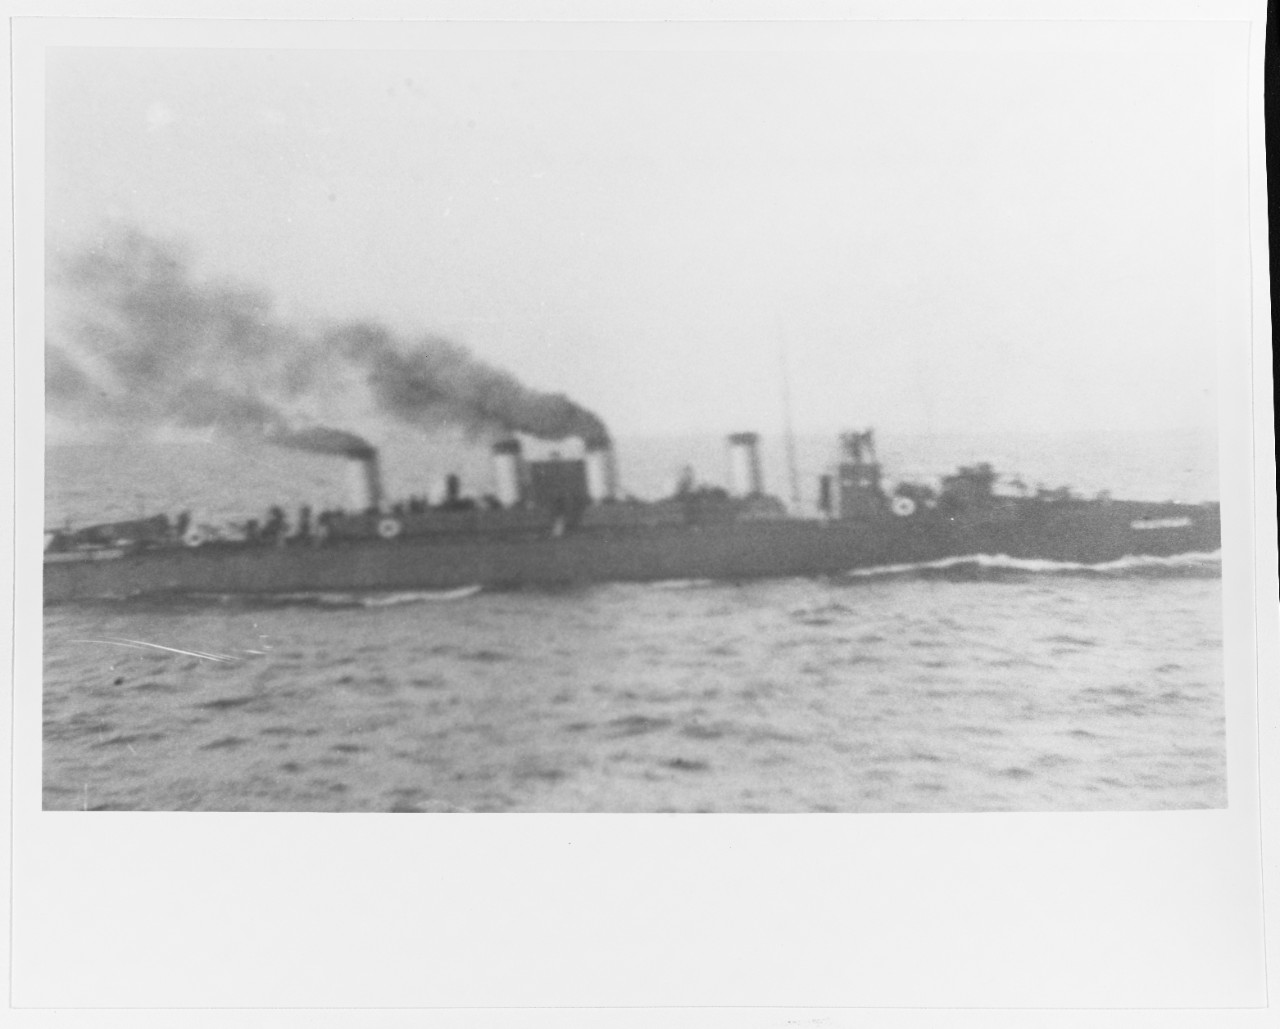 Russian Destroyer on Sea Trials in ca. 1902